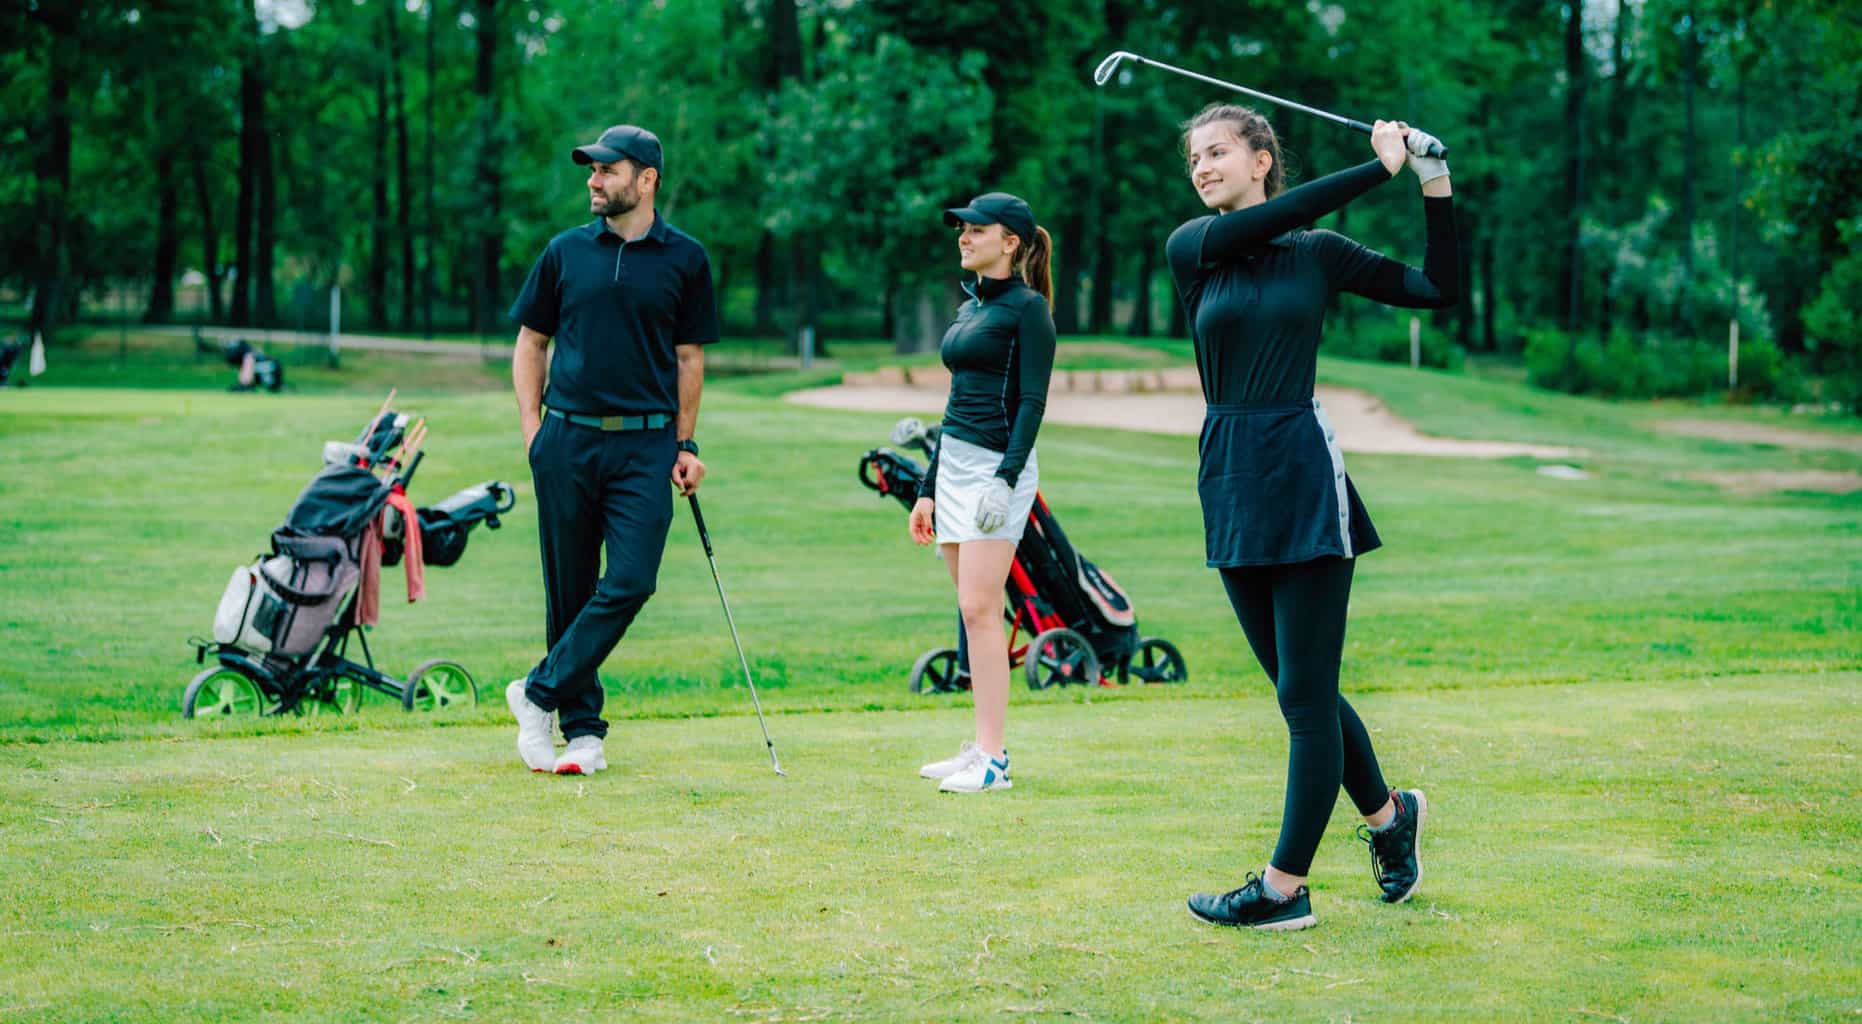 Young Woman Playing Golf with Friends